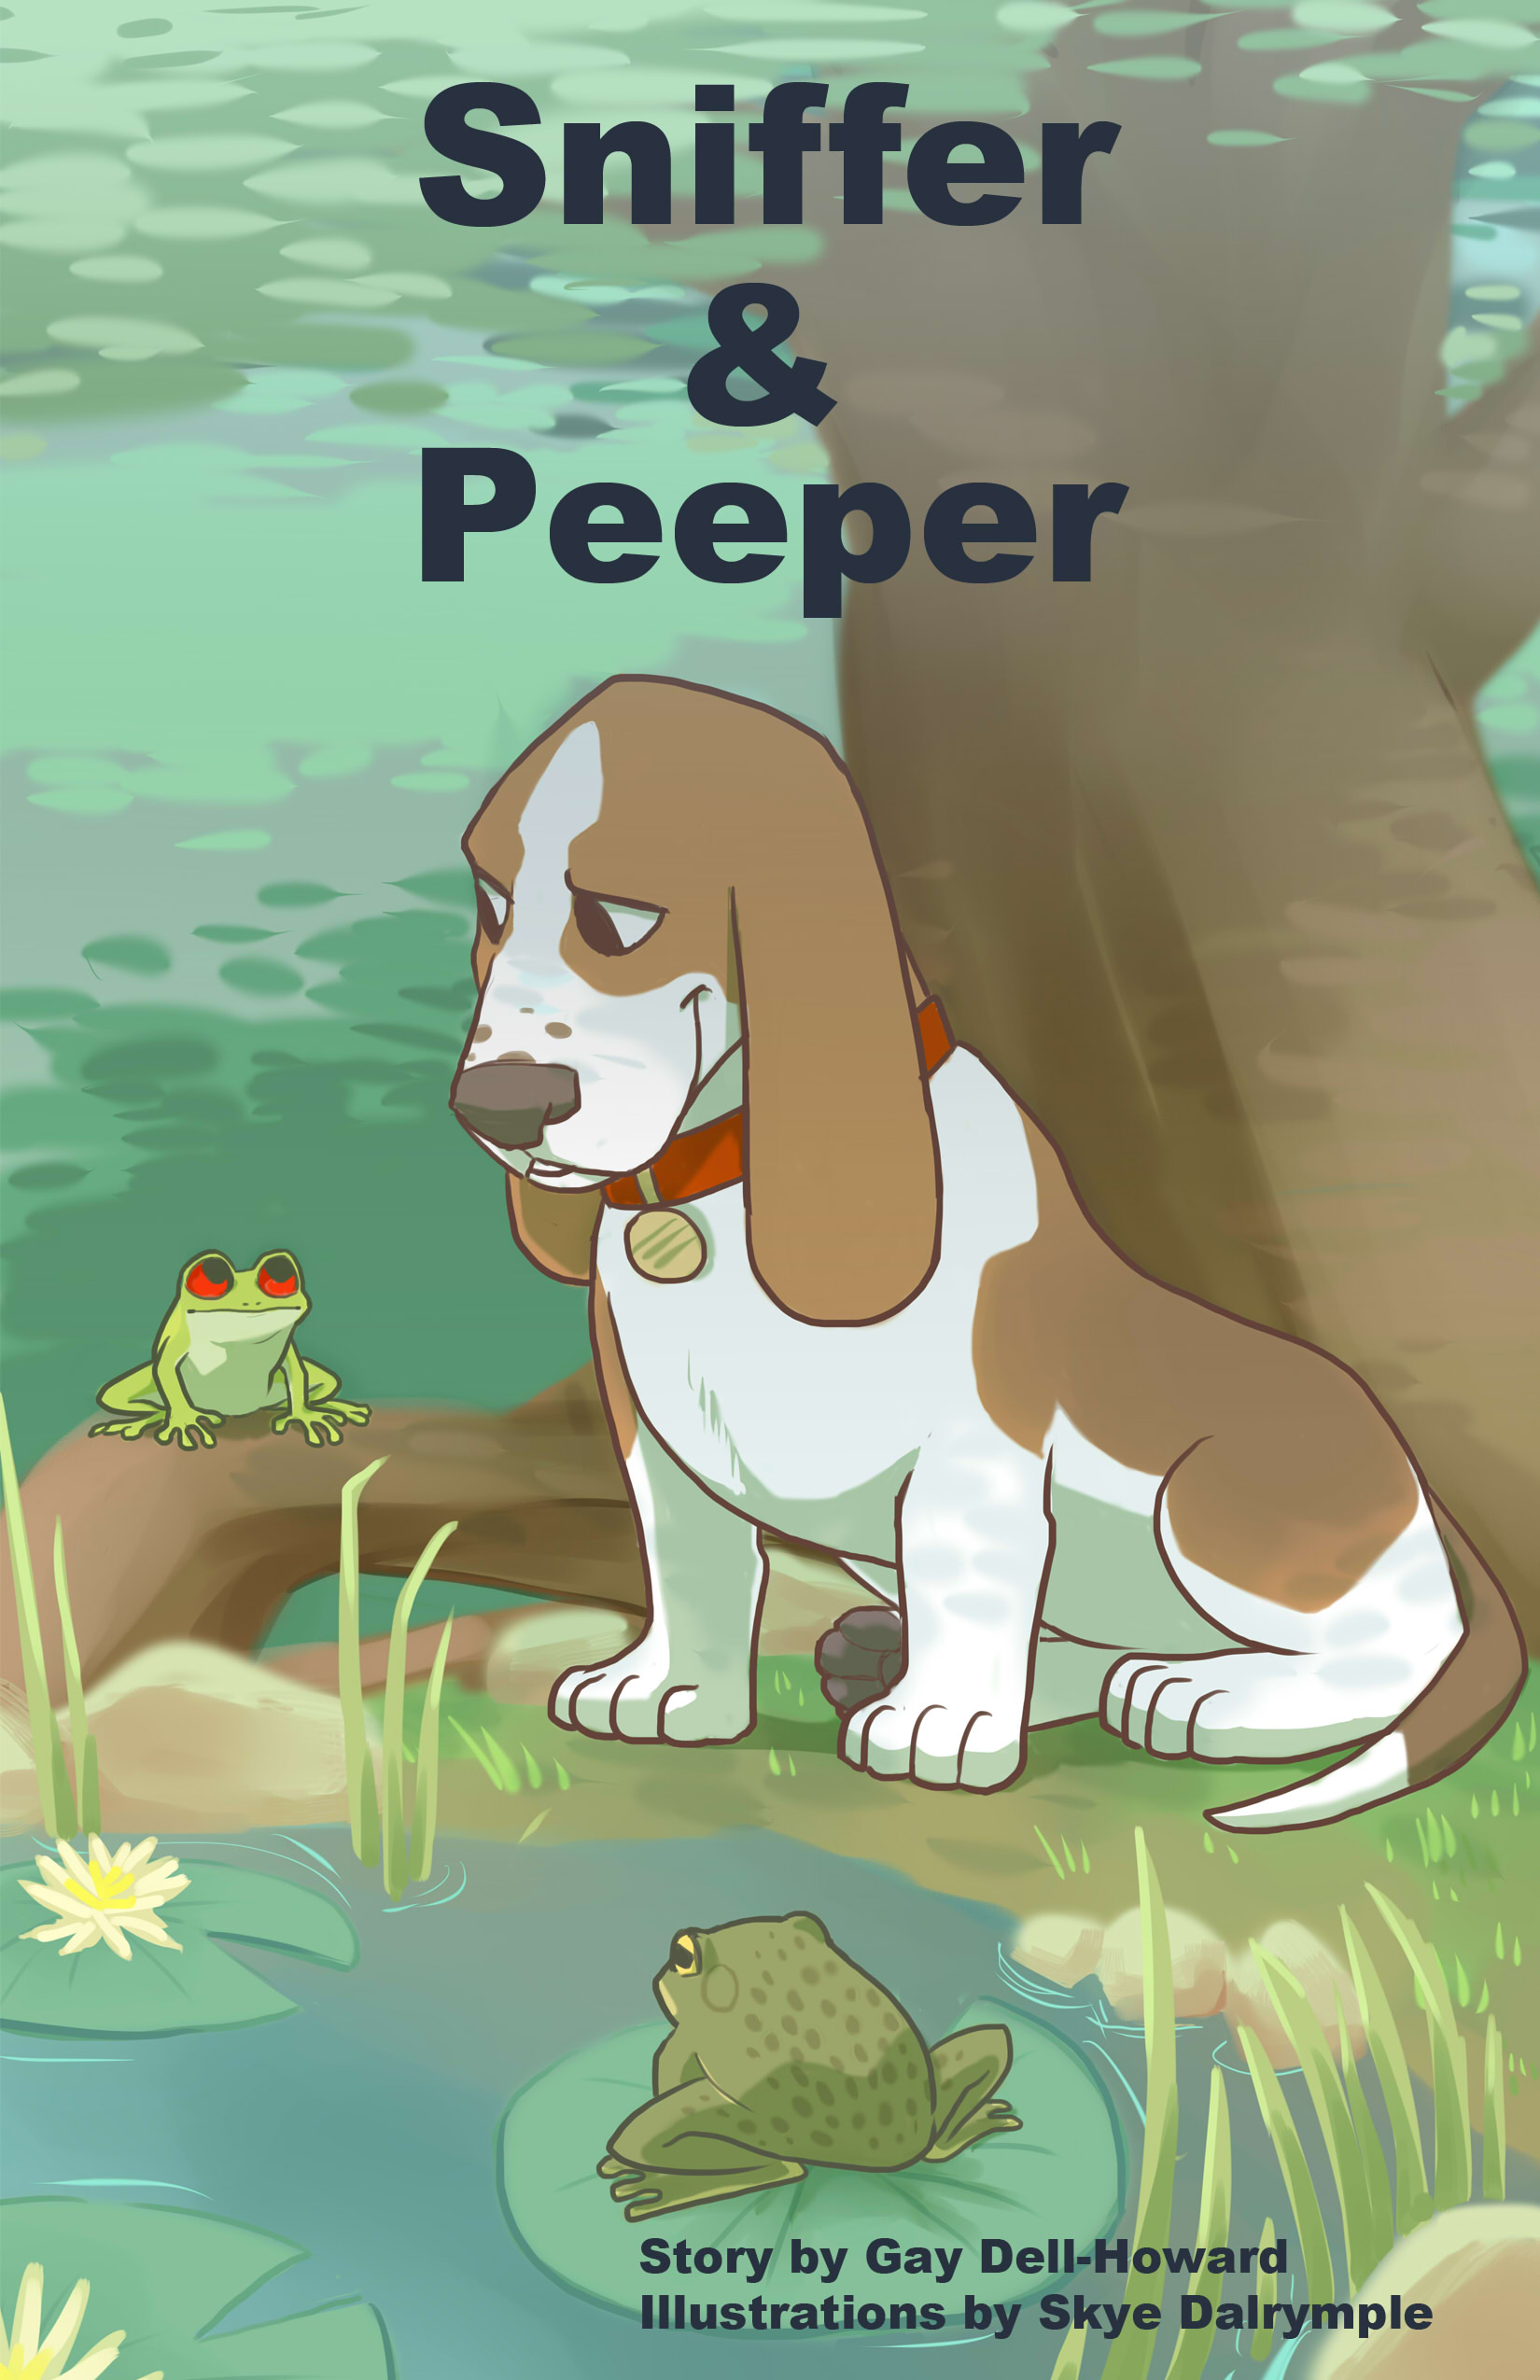 Sniffer and Peeper by Gay Dell-Howard